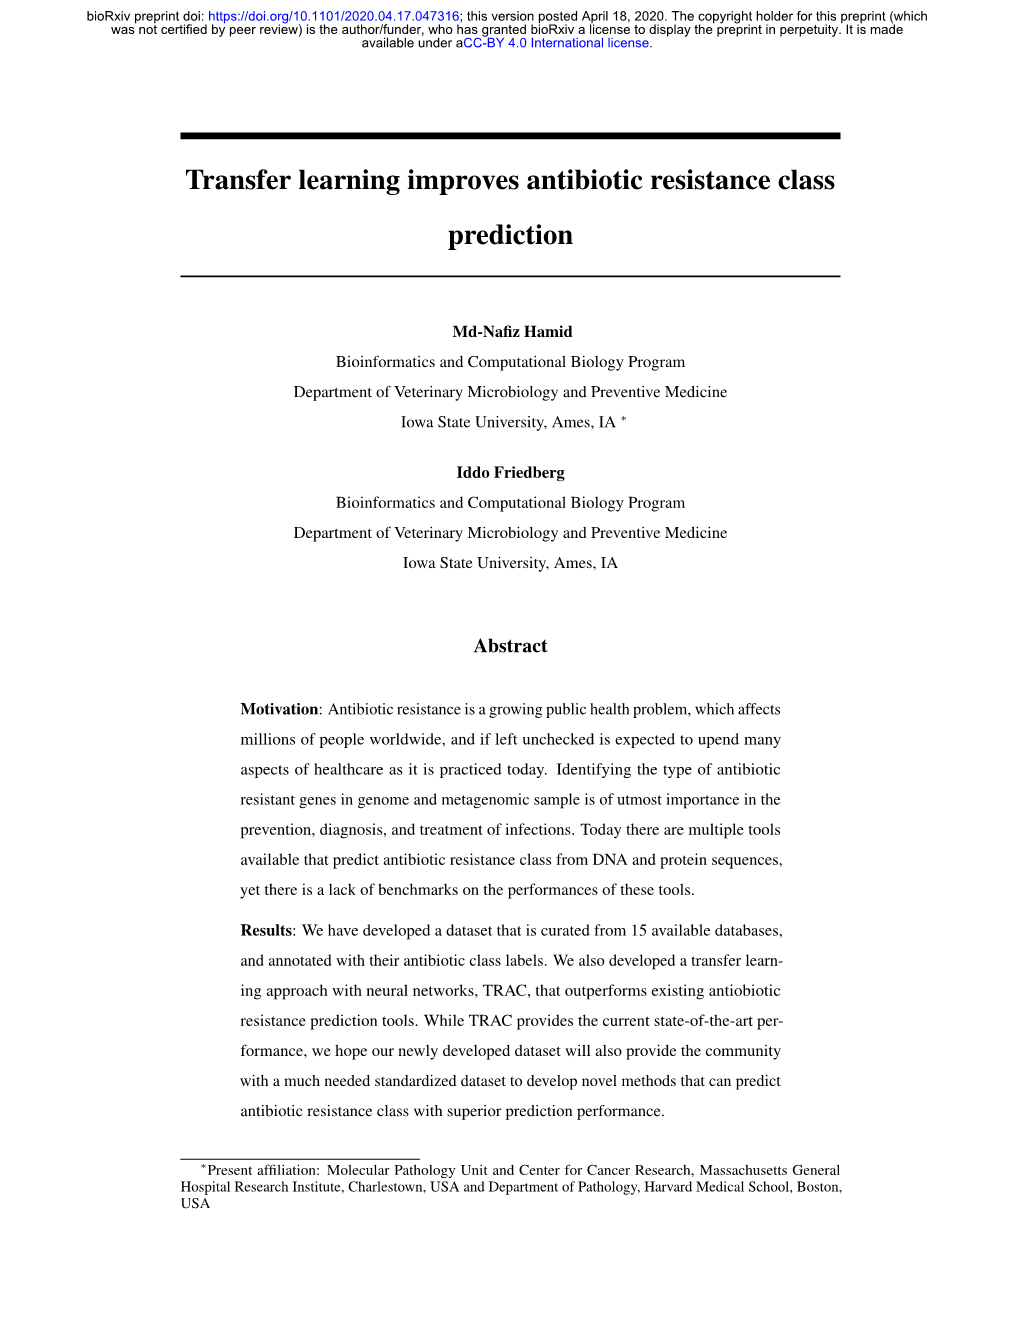 Transfer Learning Improves Antibiotic Resistance Class Prediction